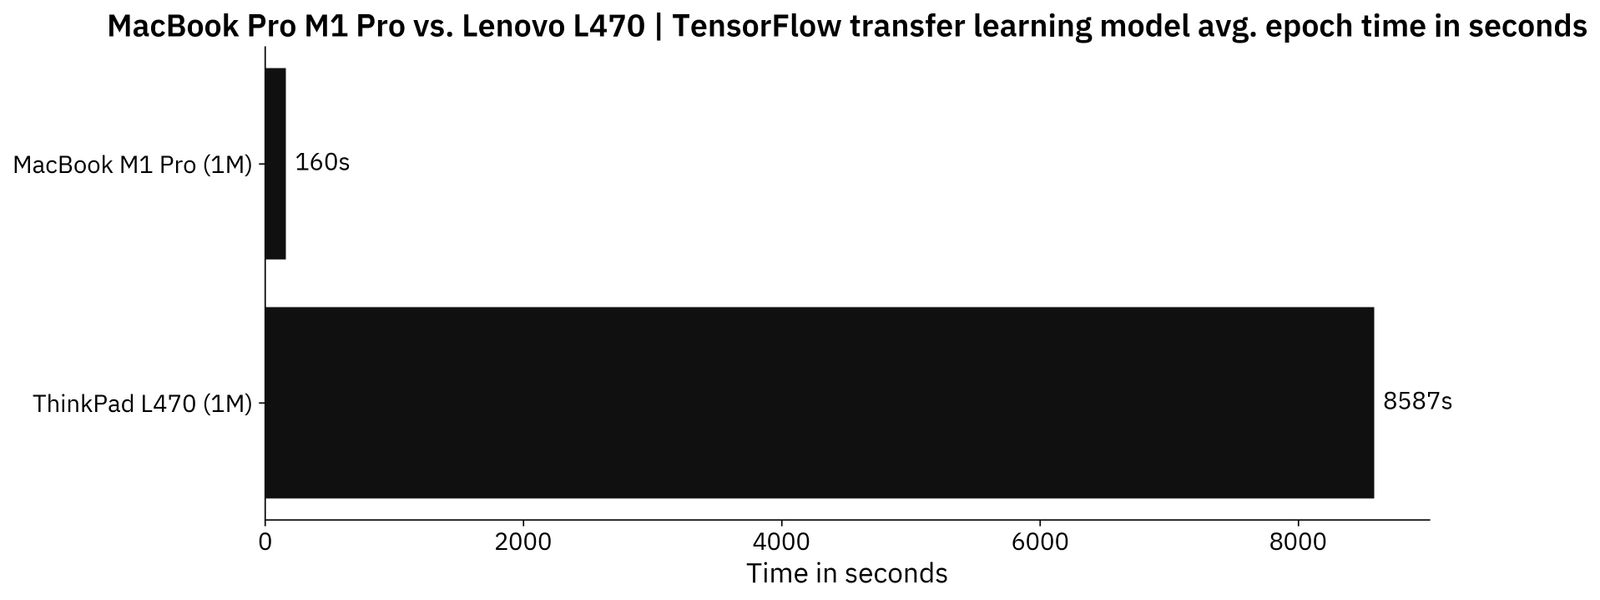 Image 9 - TensorFlow average time per epoch on a transfer learning model (image by author)